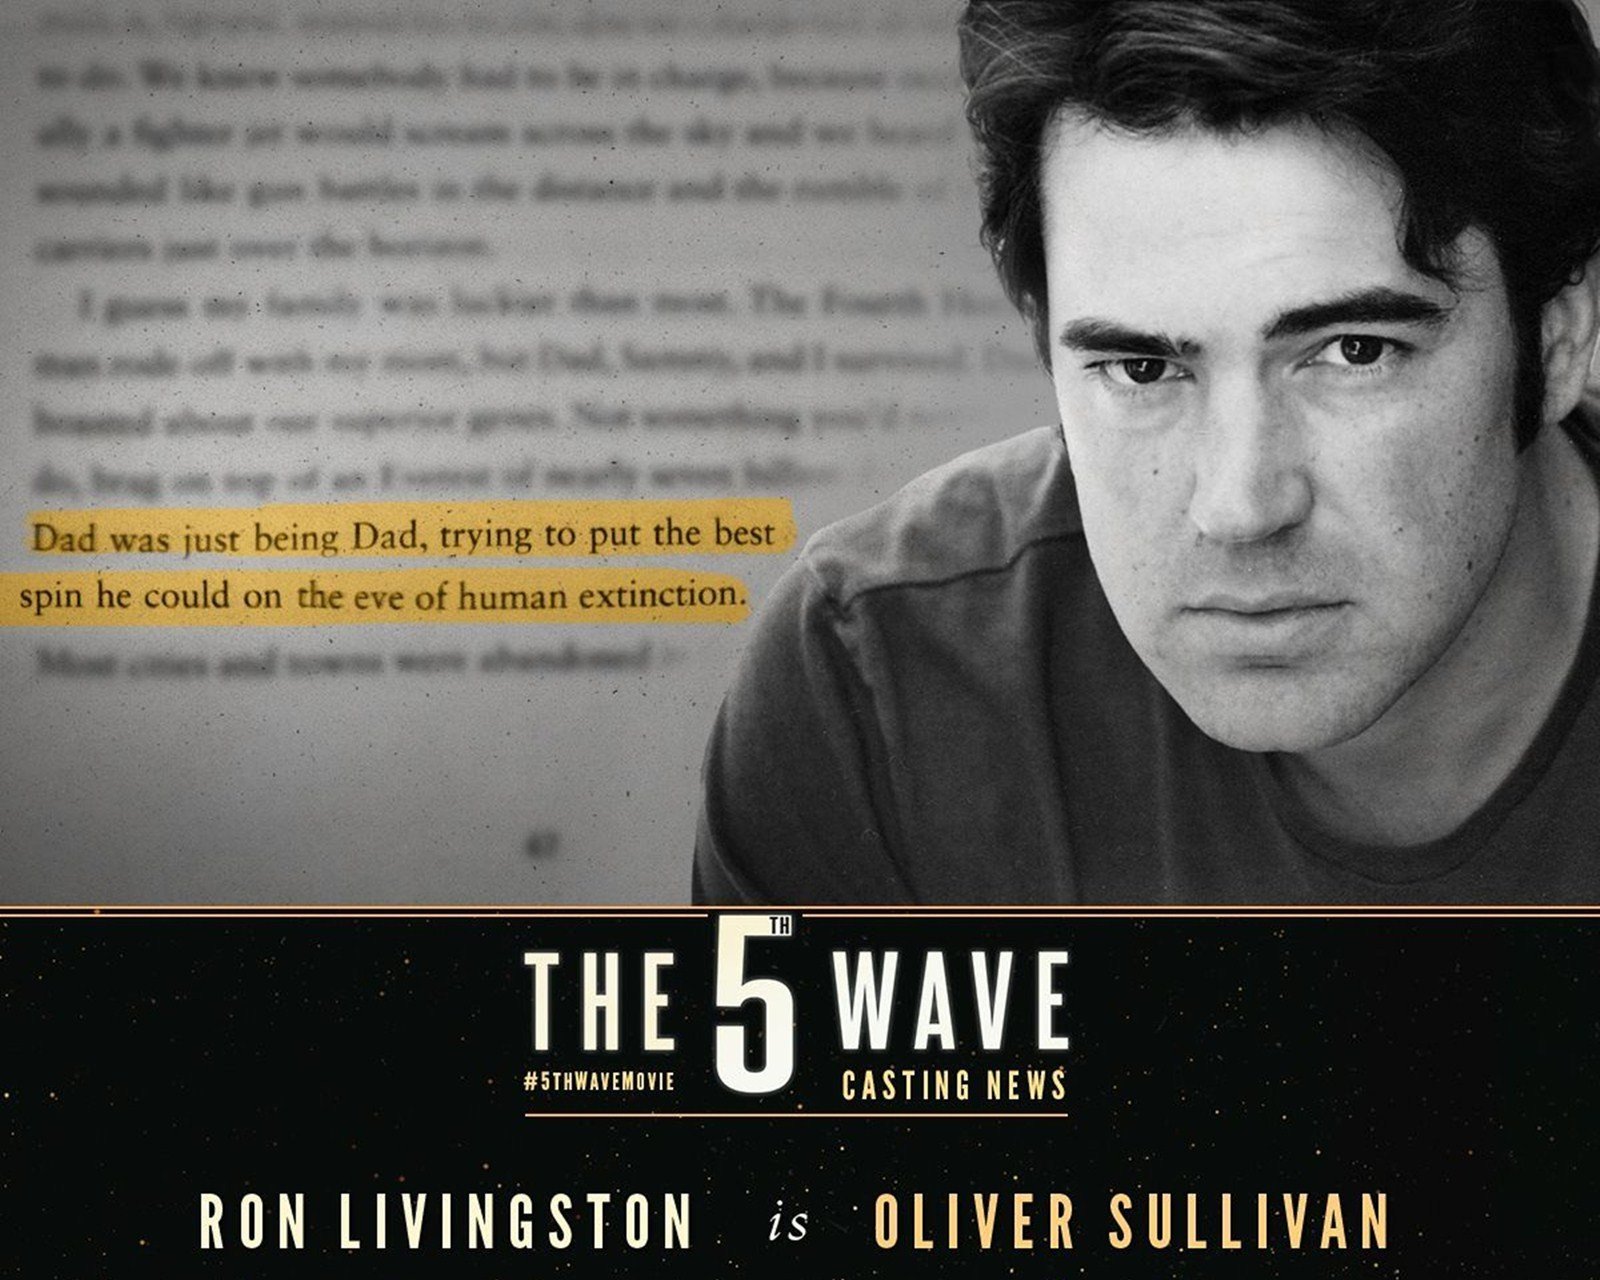 which chapter is evan revealed that he is a alien in the 5th wave